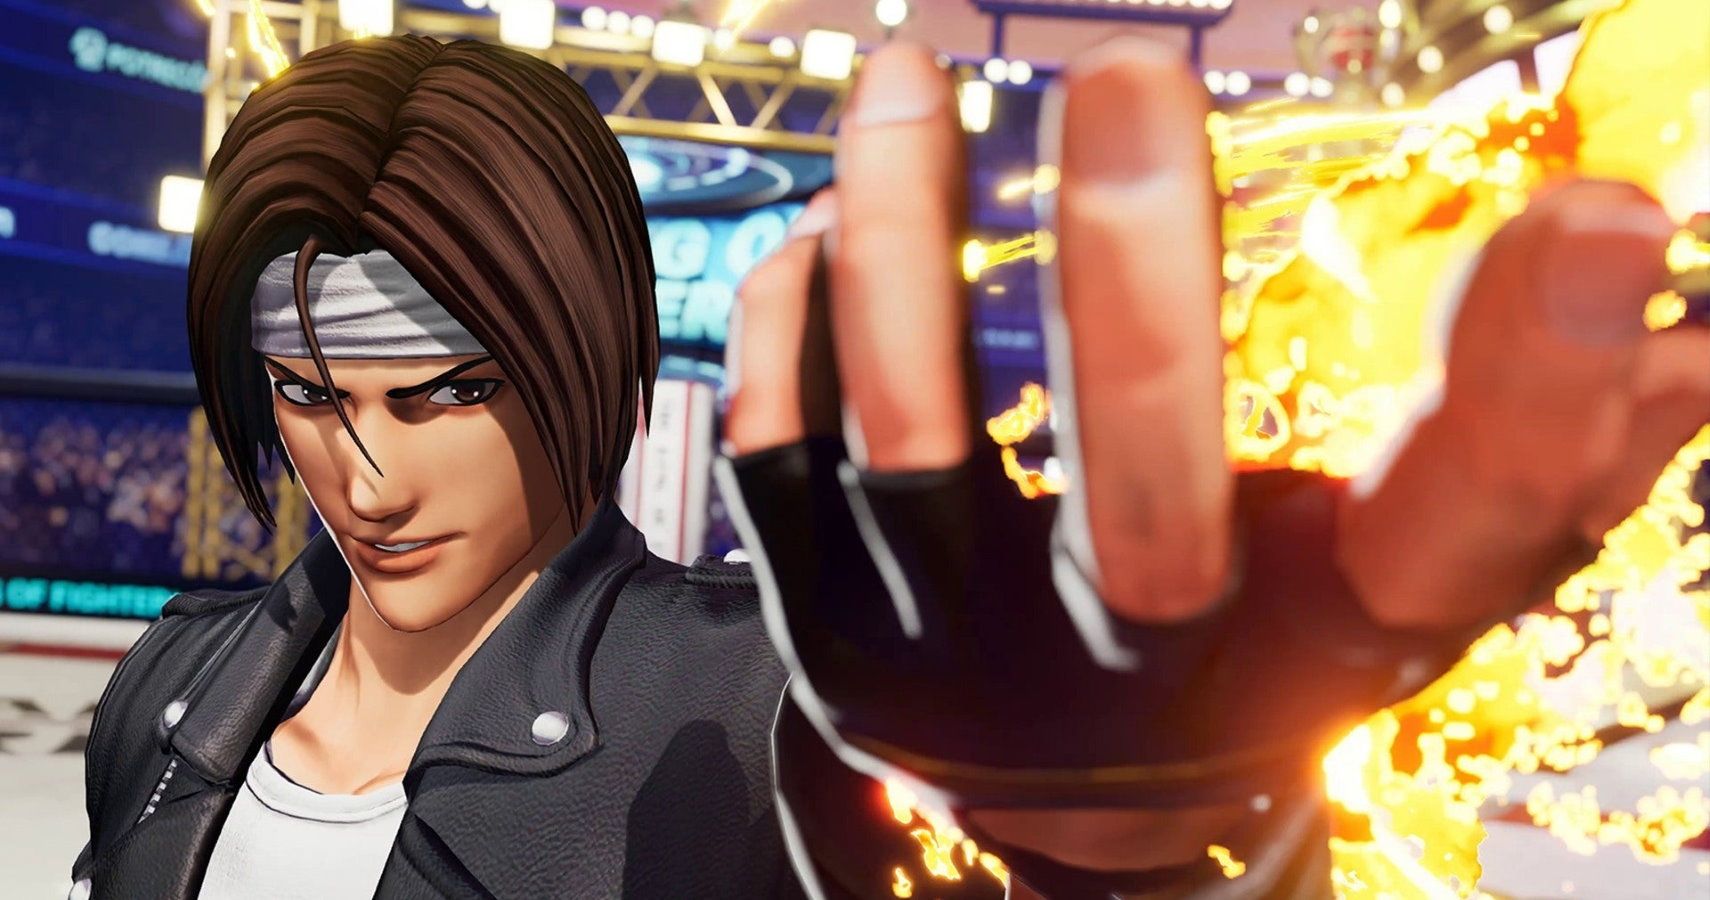 the king of fighters xv krohnen